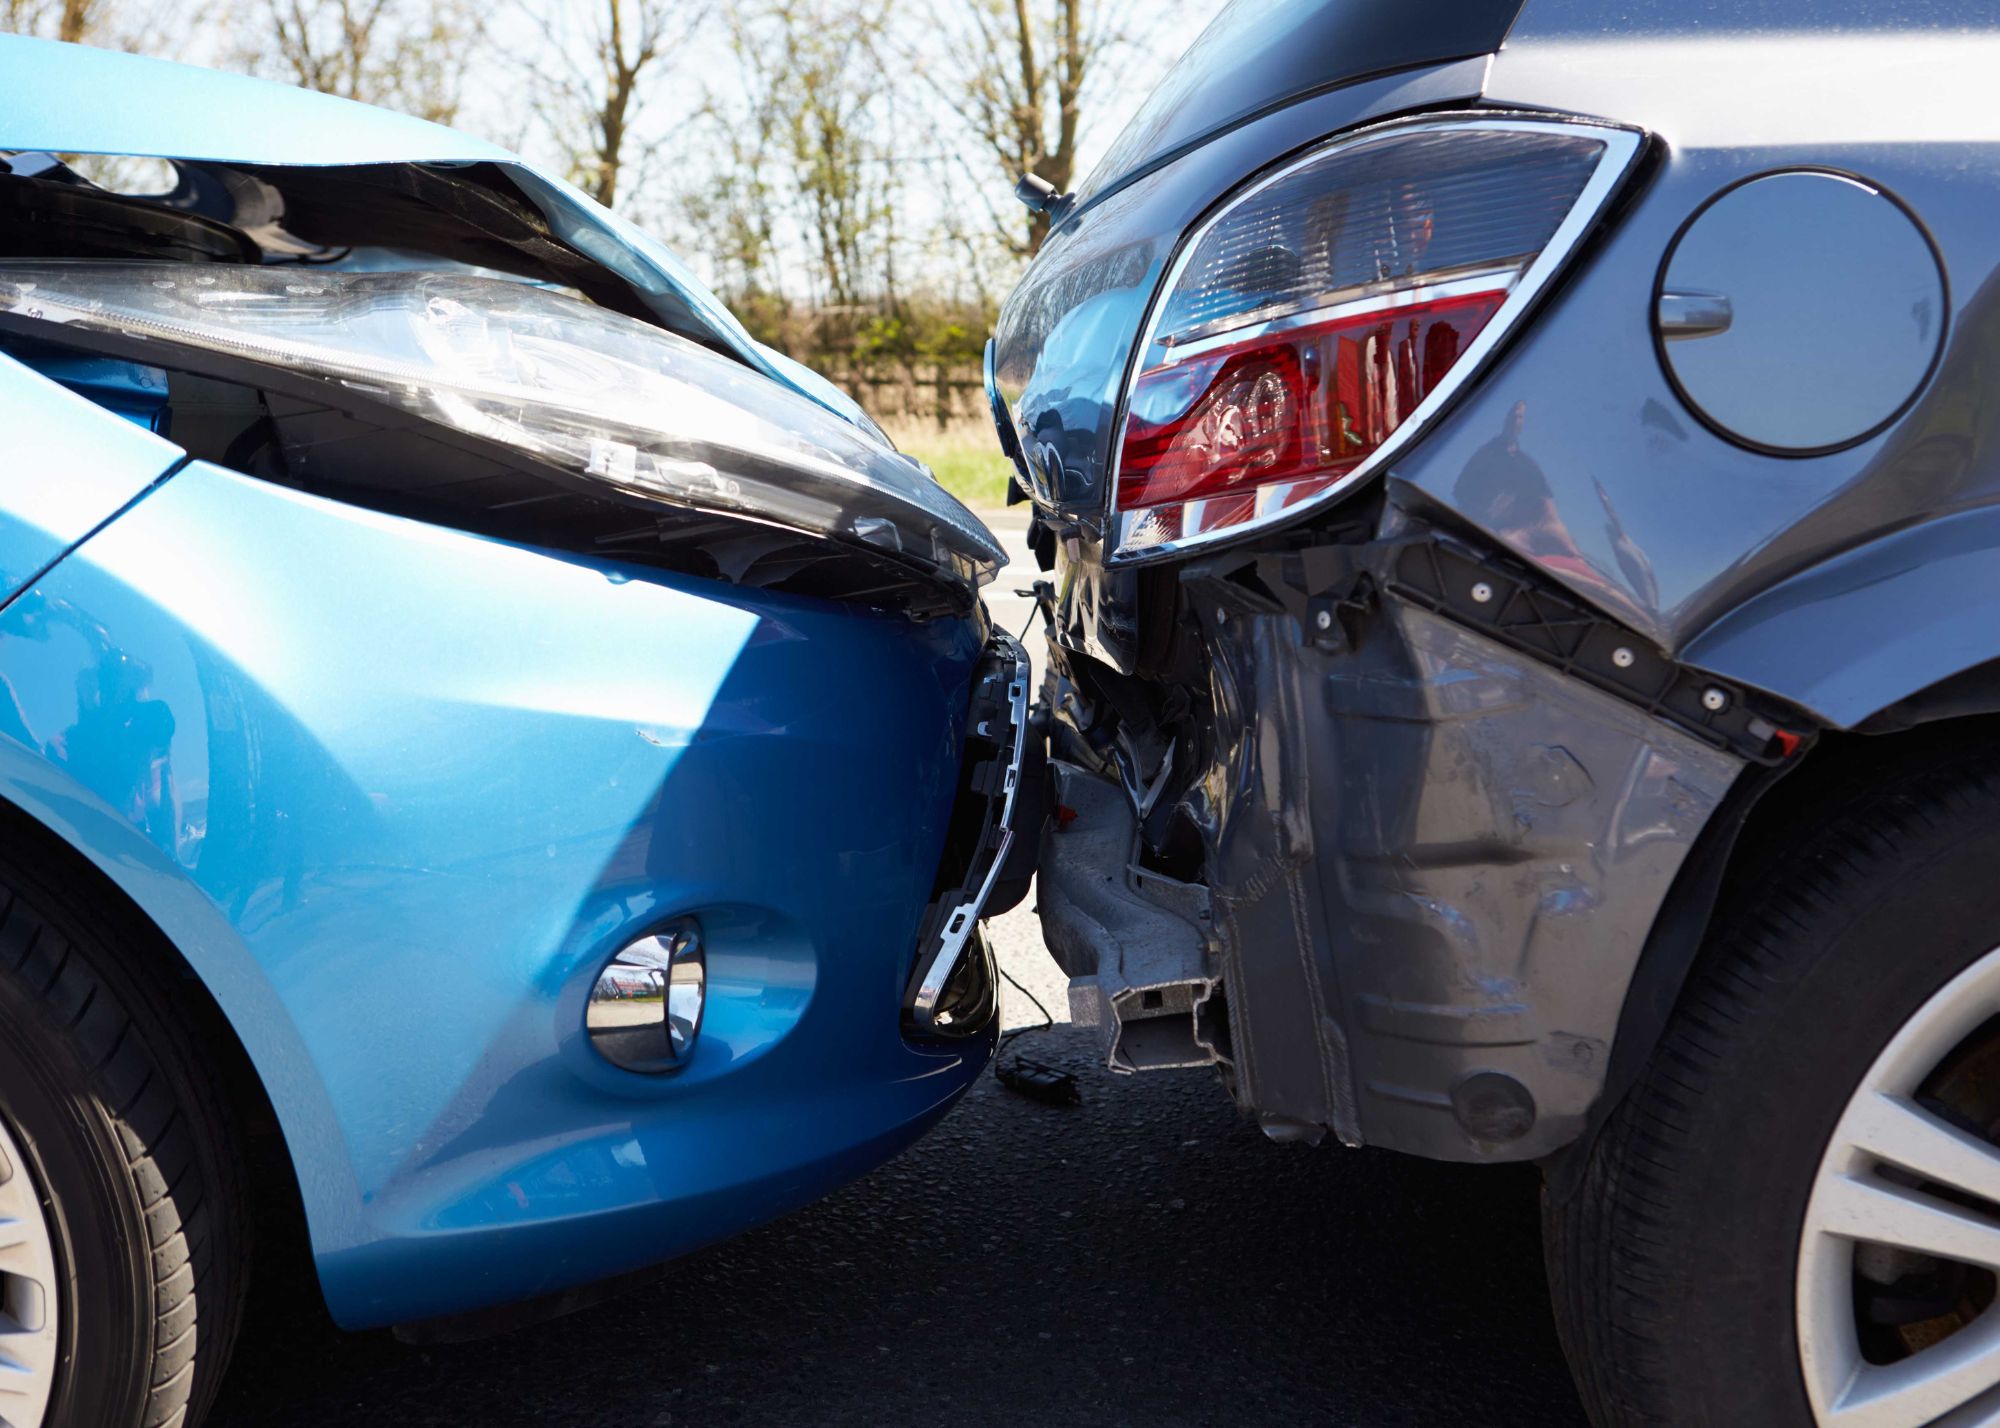 understanding just what is SR22 Car Accident Insurance